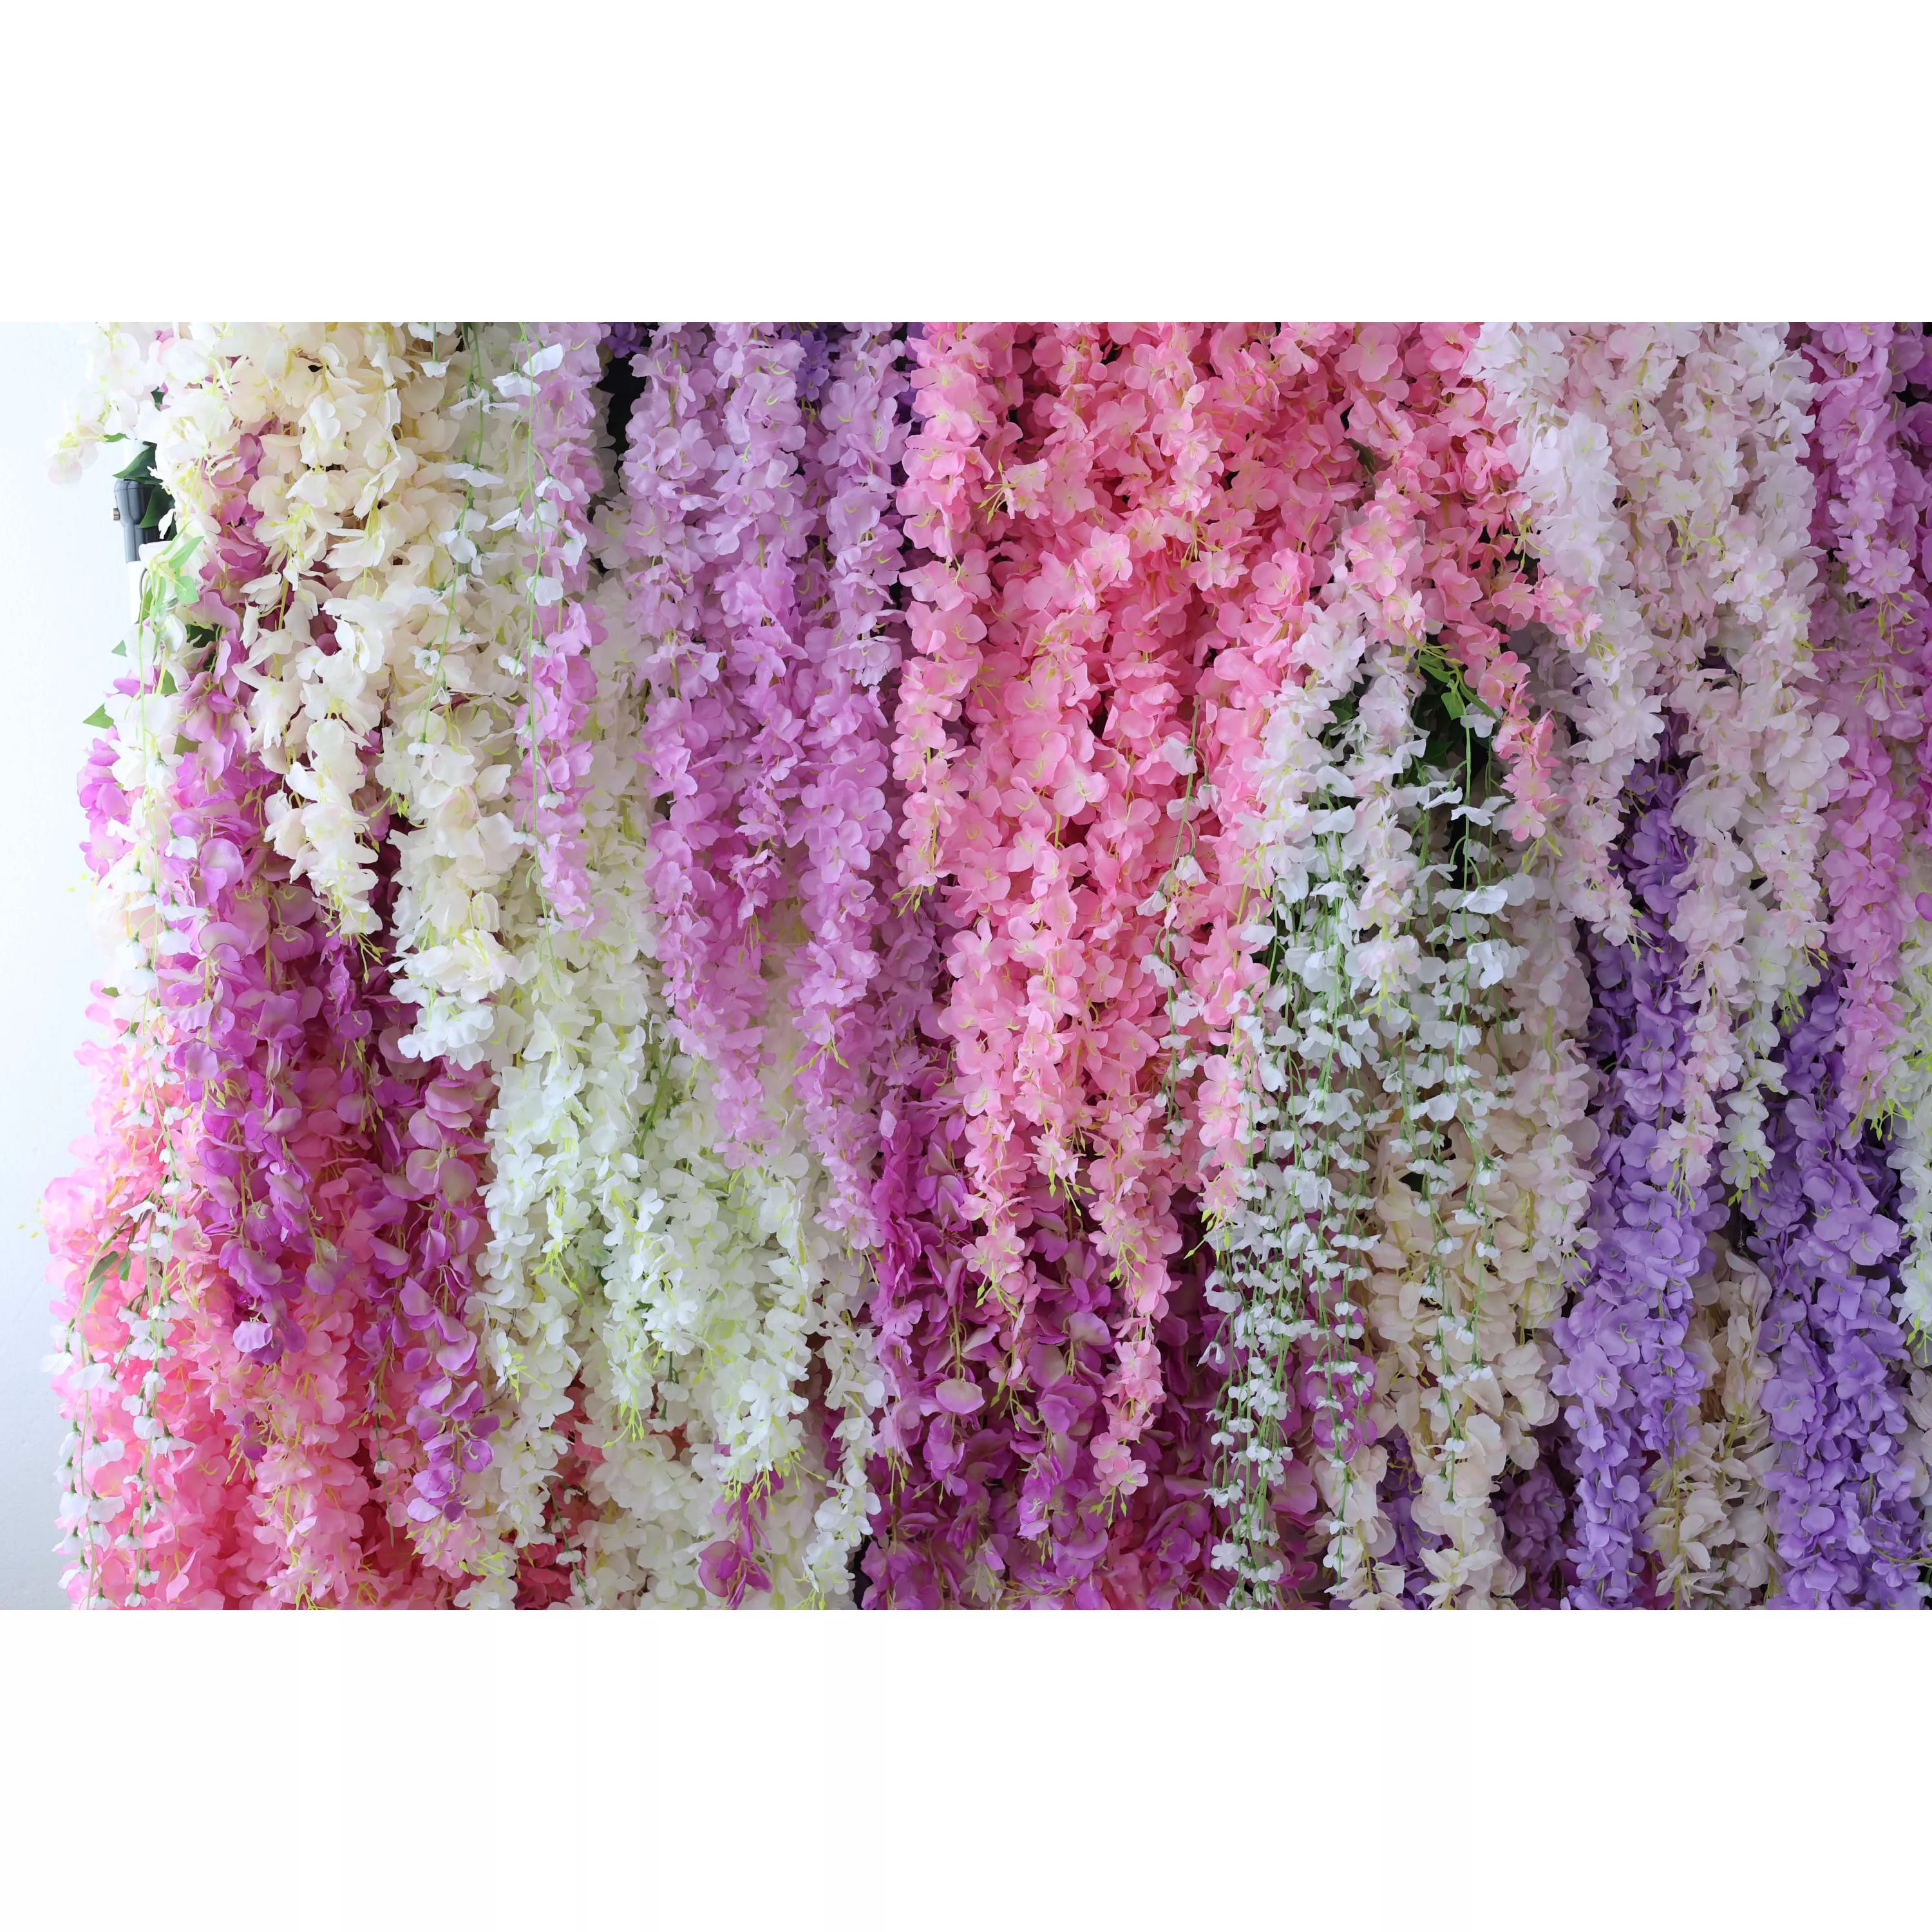 ValarFlower Artificial Floral Wall Backdrop: Cascading Wisteria Wonderland - A Symphony of Pastels-VF-278